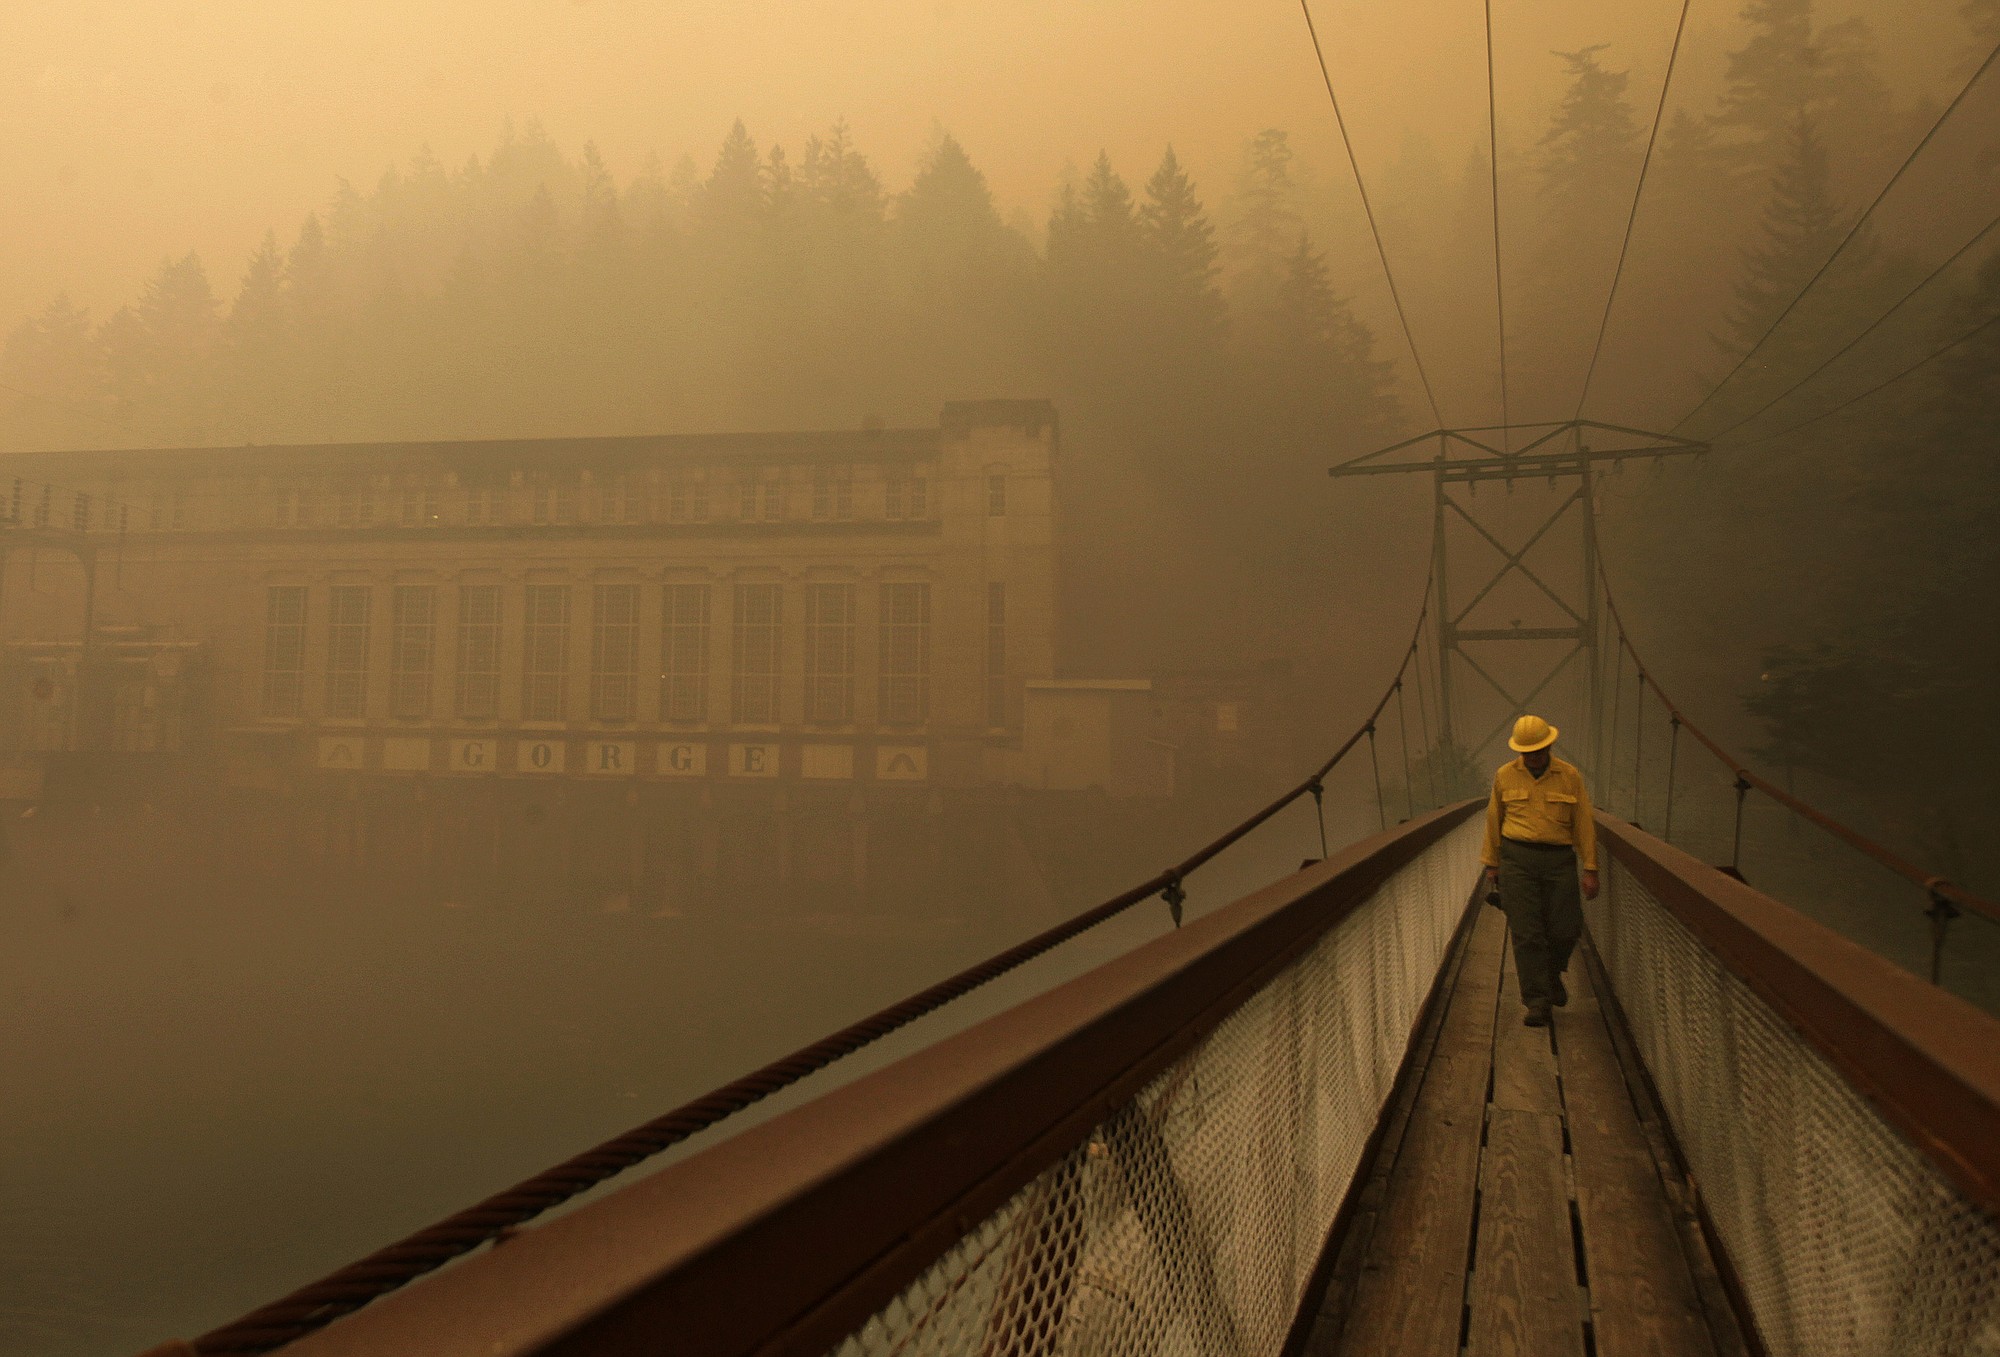 Dennis Godfrey, with the Great Basin Incident Management Team 4, walks across a bridge from the Gorge Powerhouse, Wednesday, Aug. 26, 2015, near Newhalem, Wash. Smoky conditions grounded helicopters and airplanes Wednesday that had been fighting the fires.